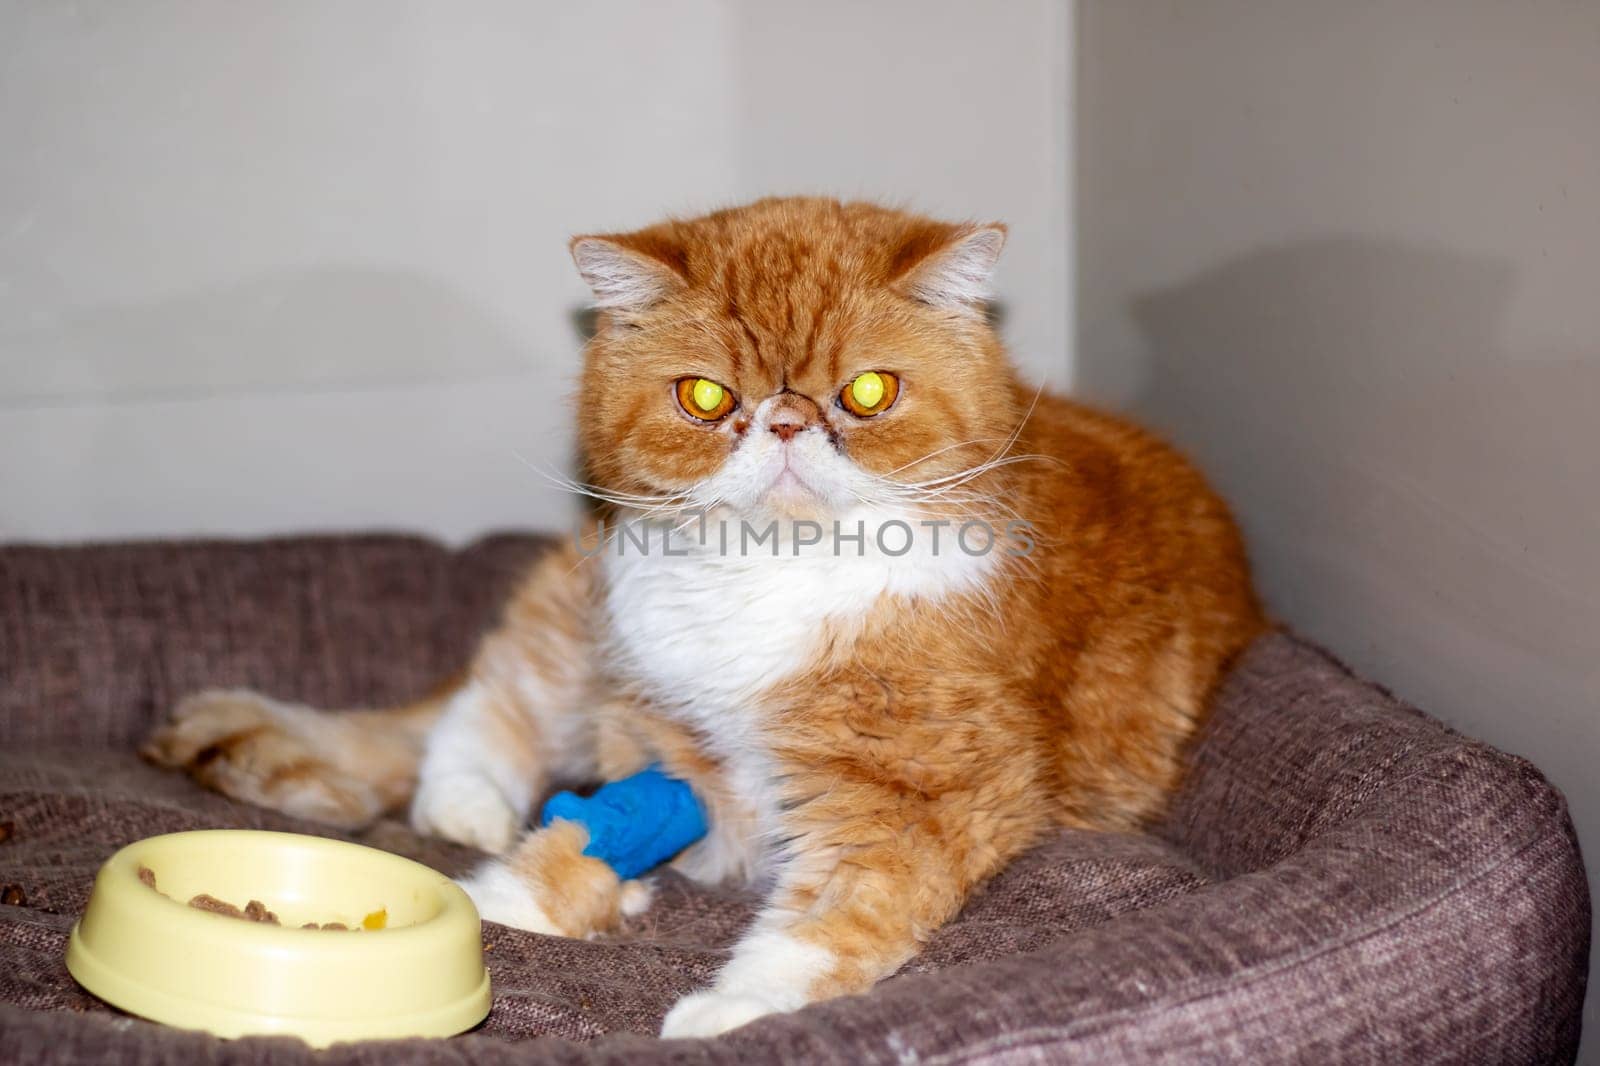 Ginger exotic cat with a catheter on his paw close up